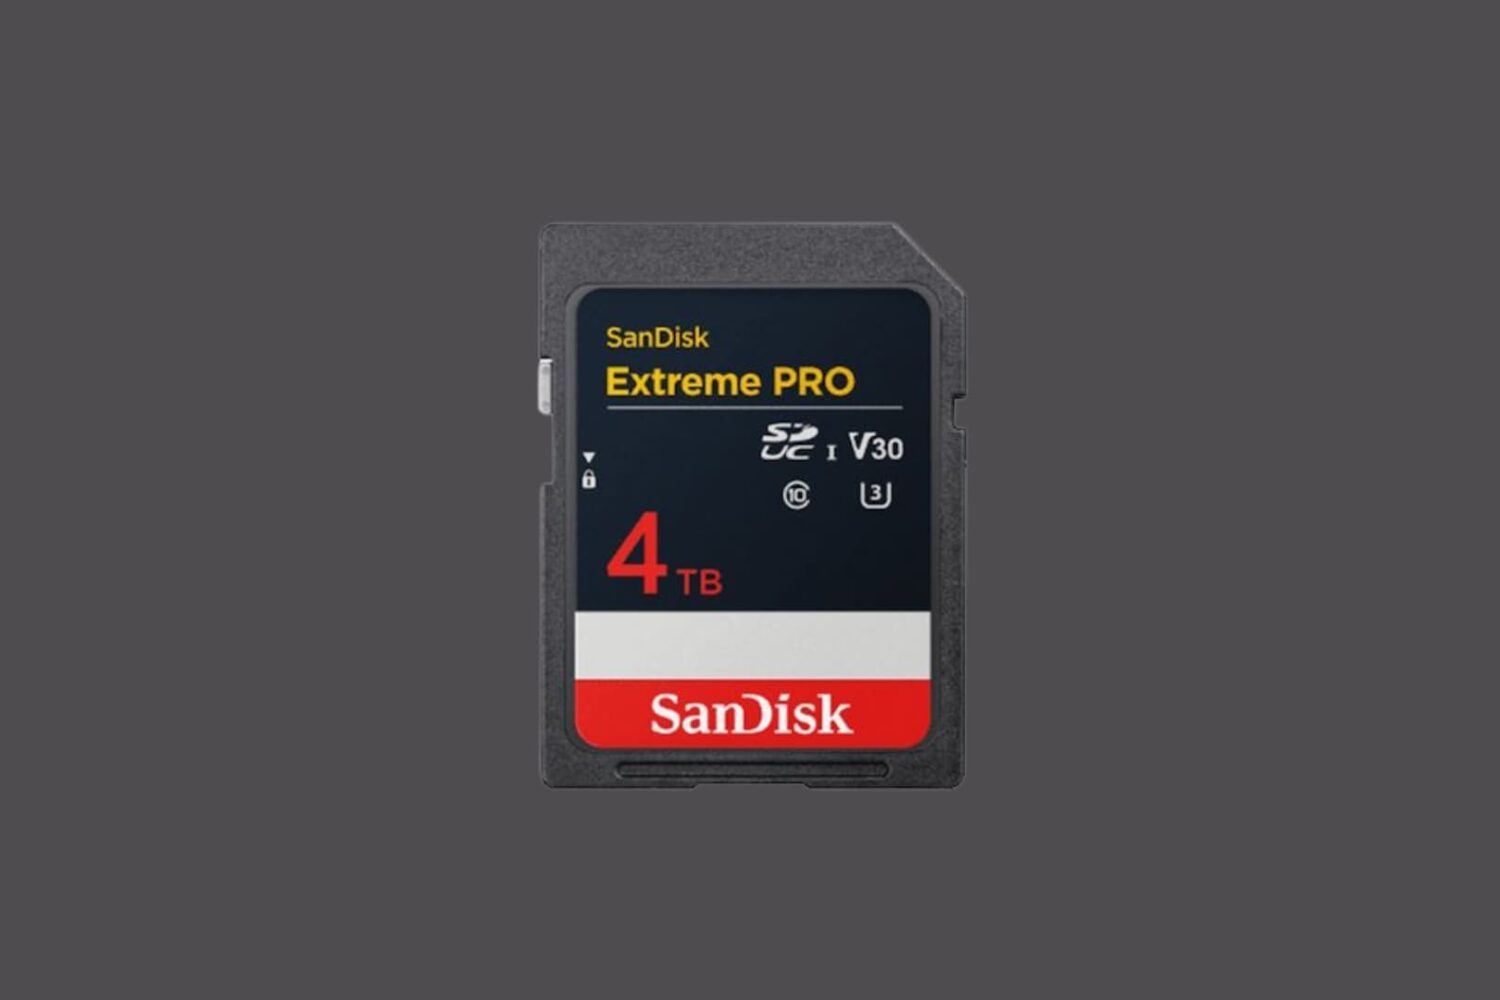 SanDisk’s upcoming world’s first Extreme Pro 4TB UHS-I SD card.